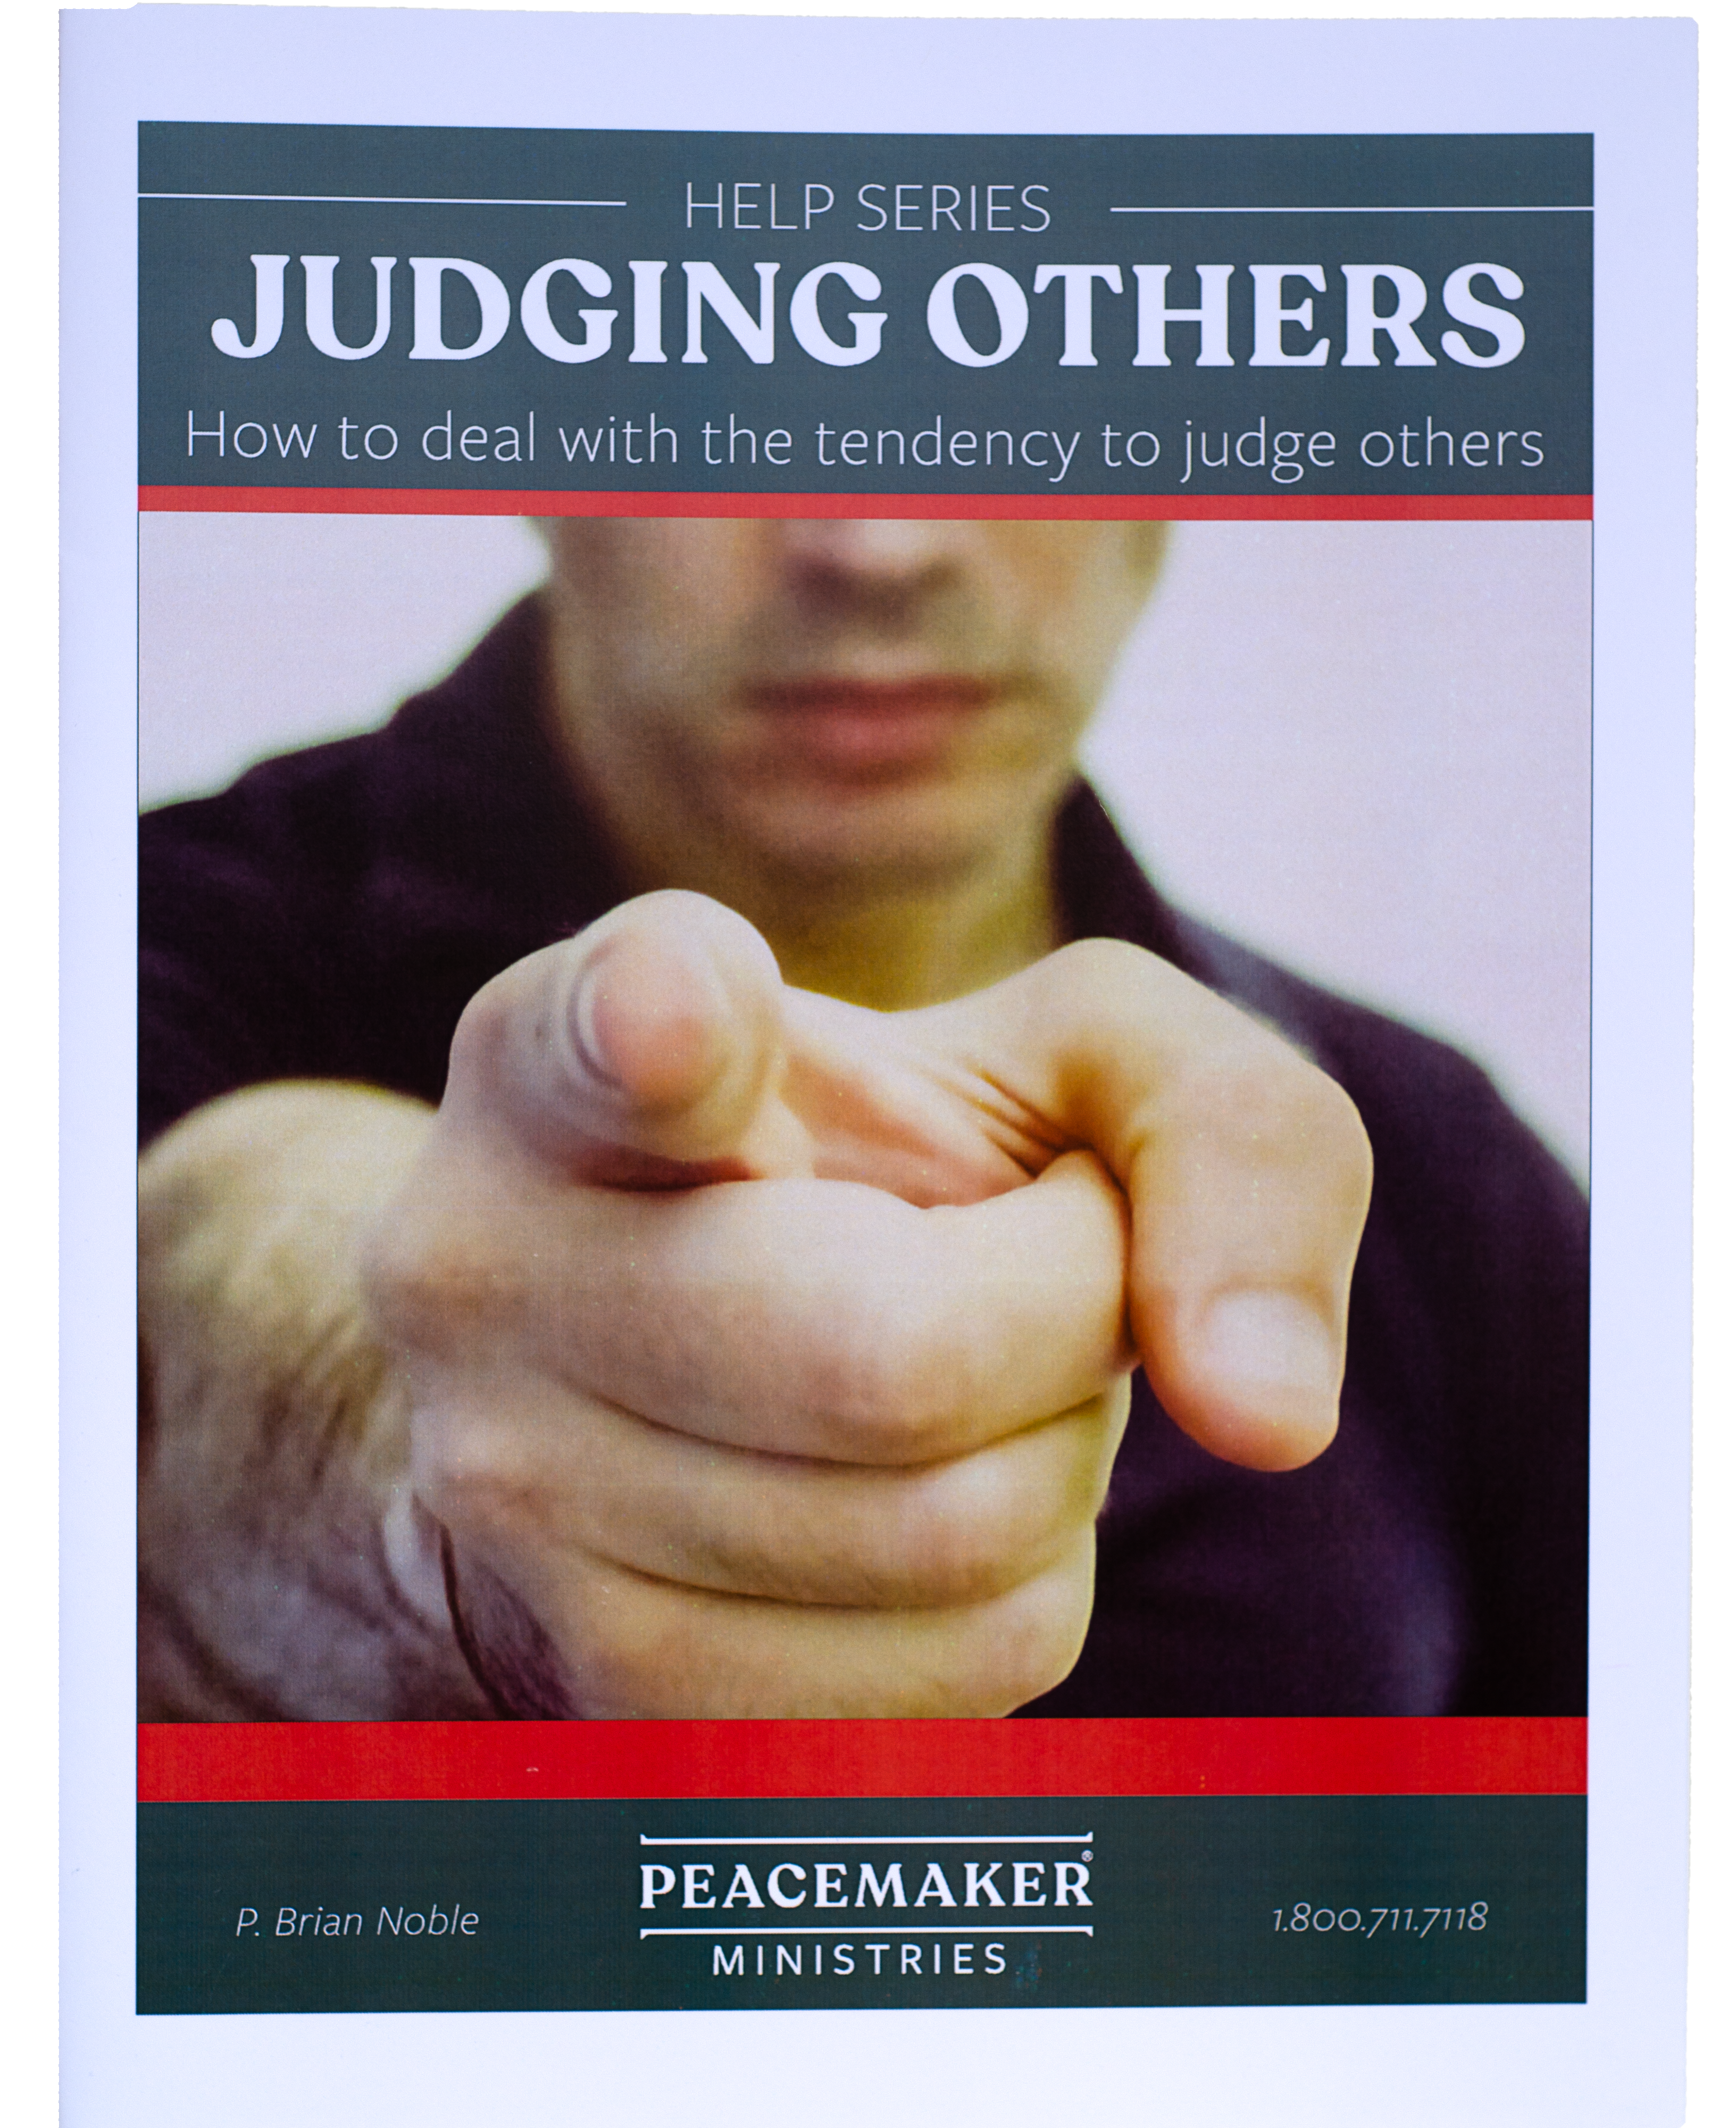 Help Series: Judging Others